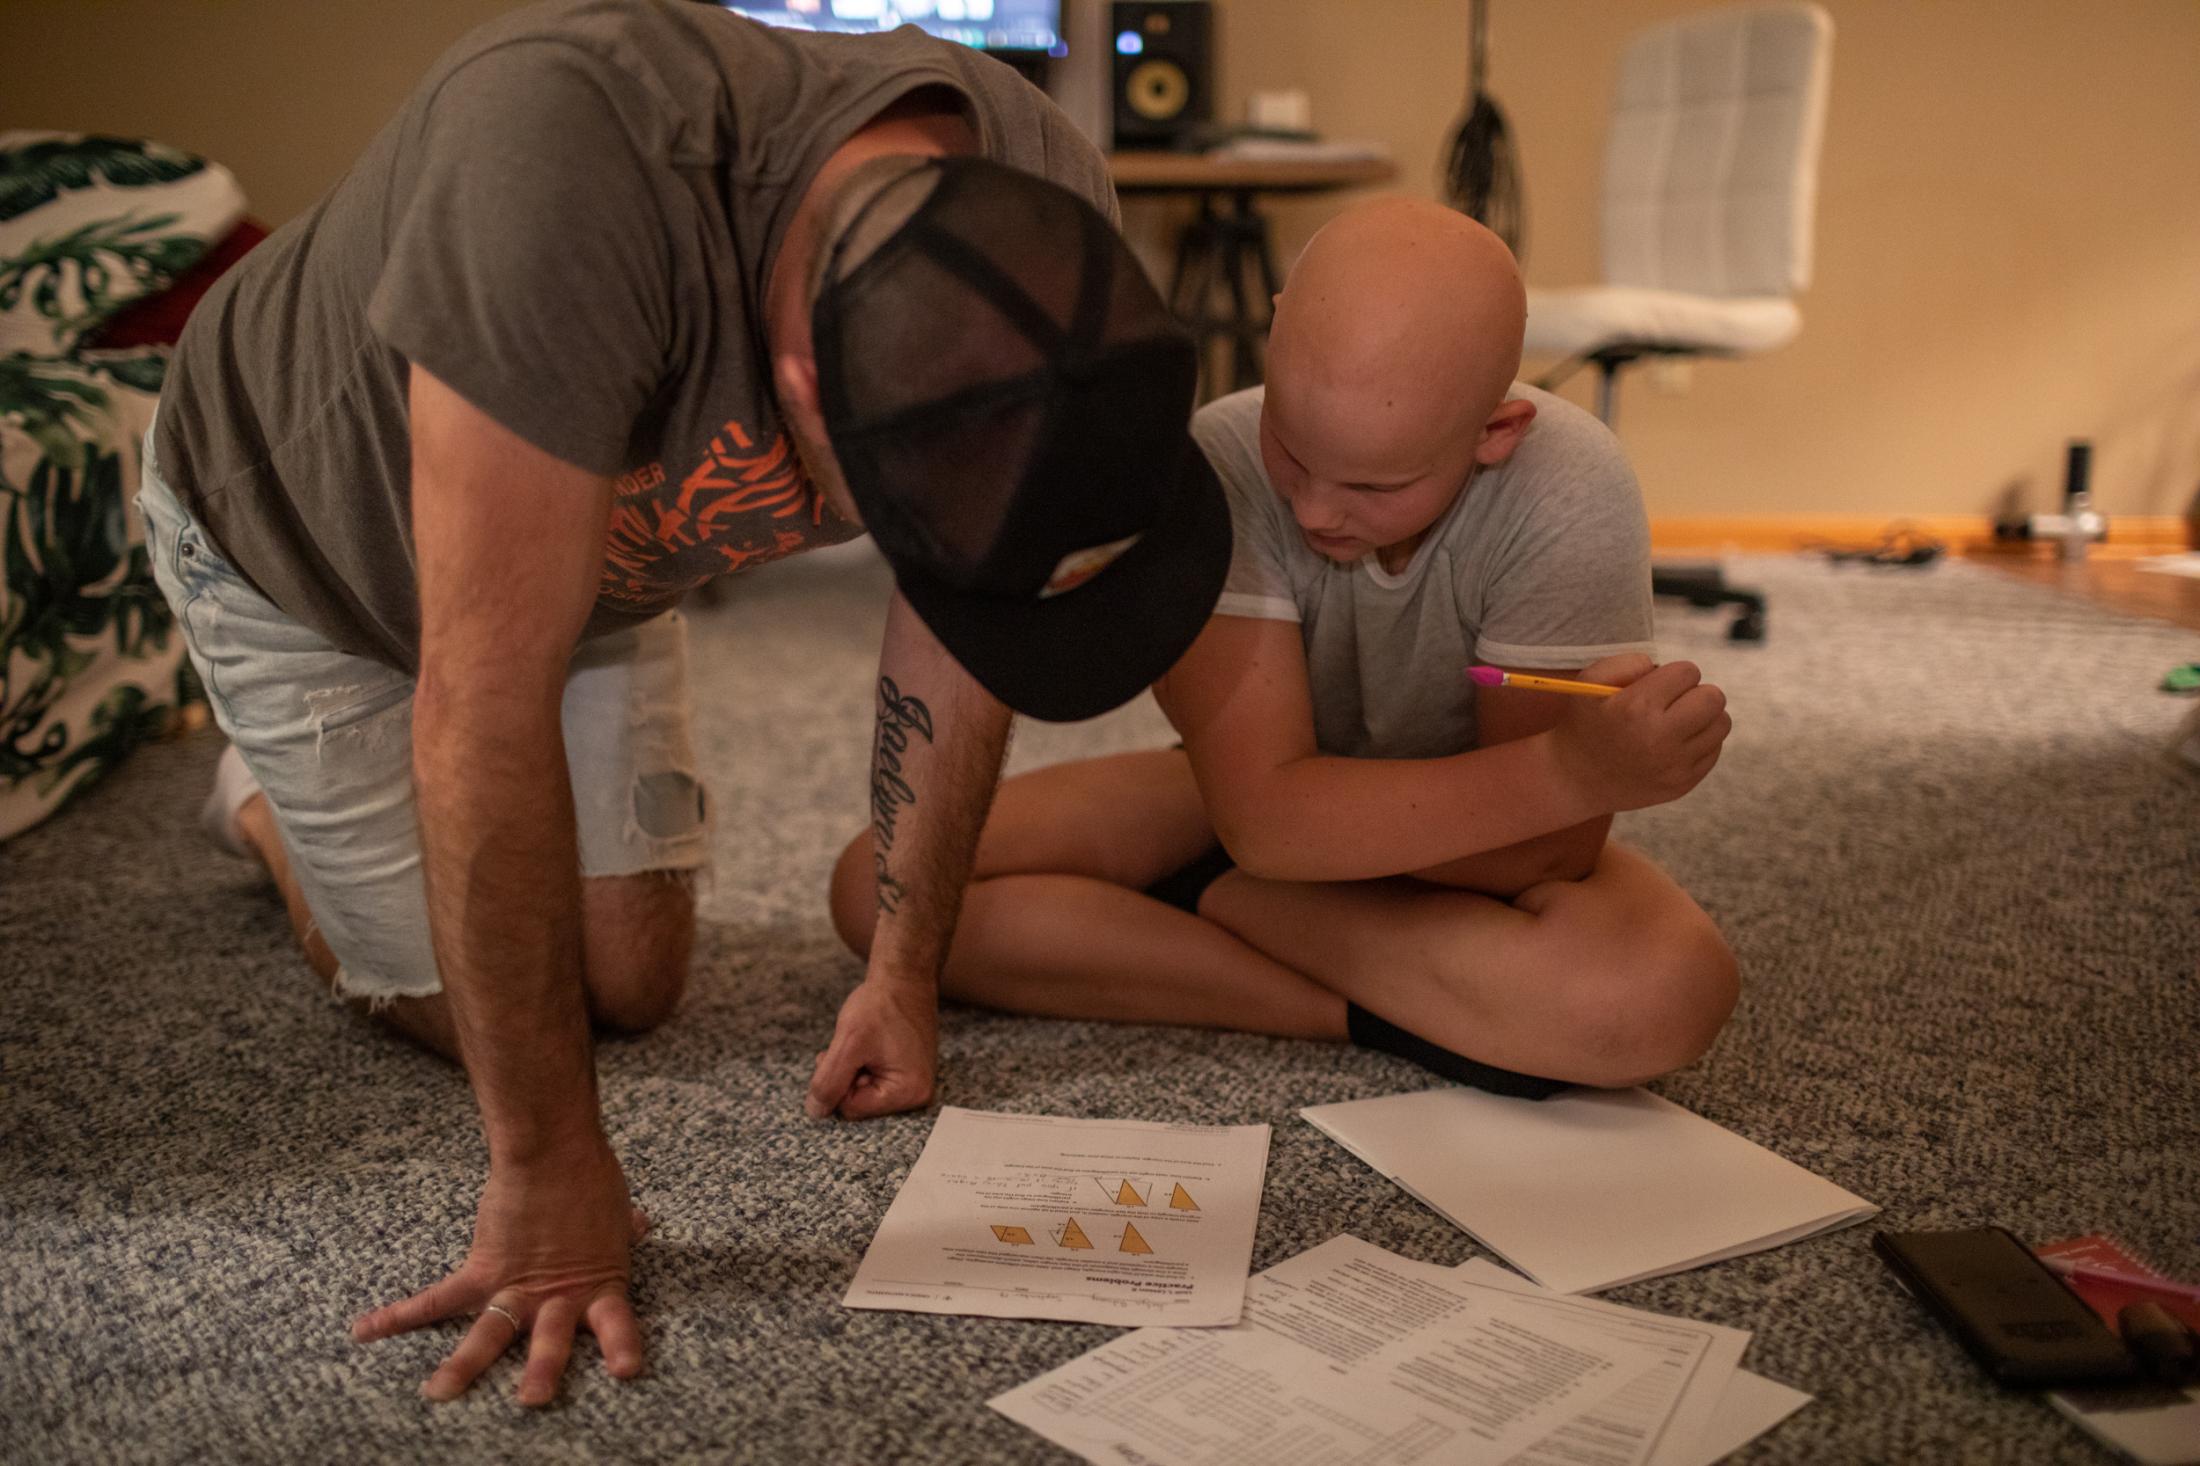 After dinner Jaylan finishes her homework with the help of her dad, South Portland, Maine,...